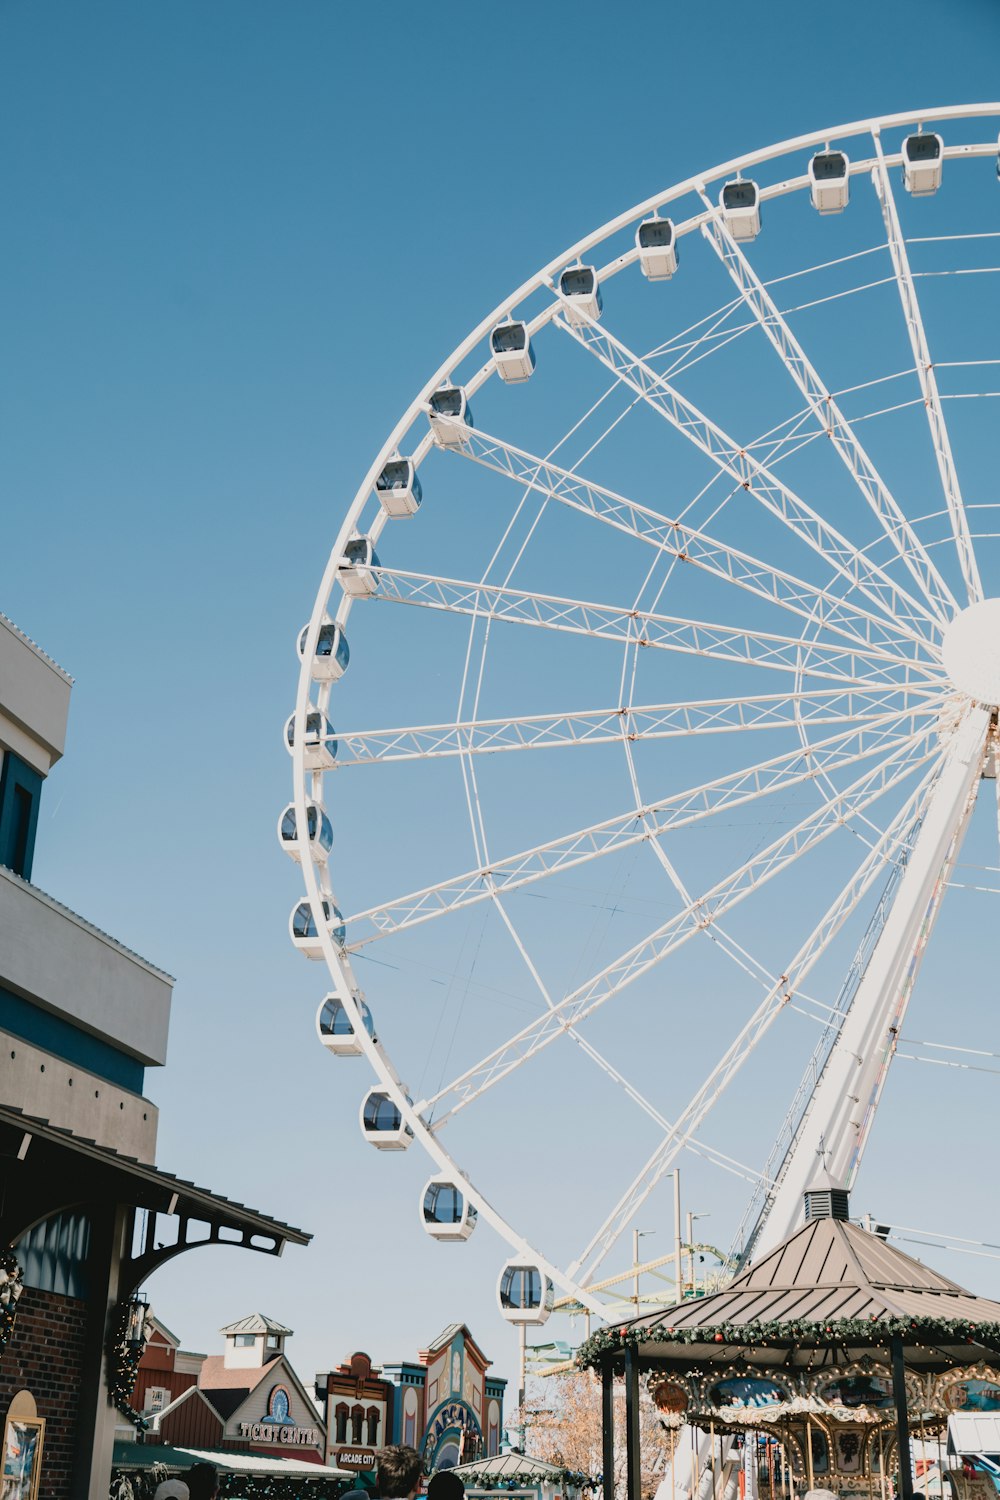 a large white ferris wheel sitting next to a building